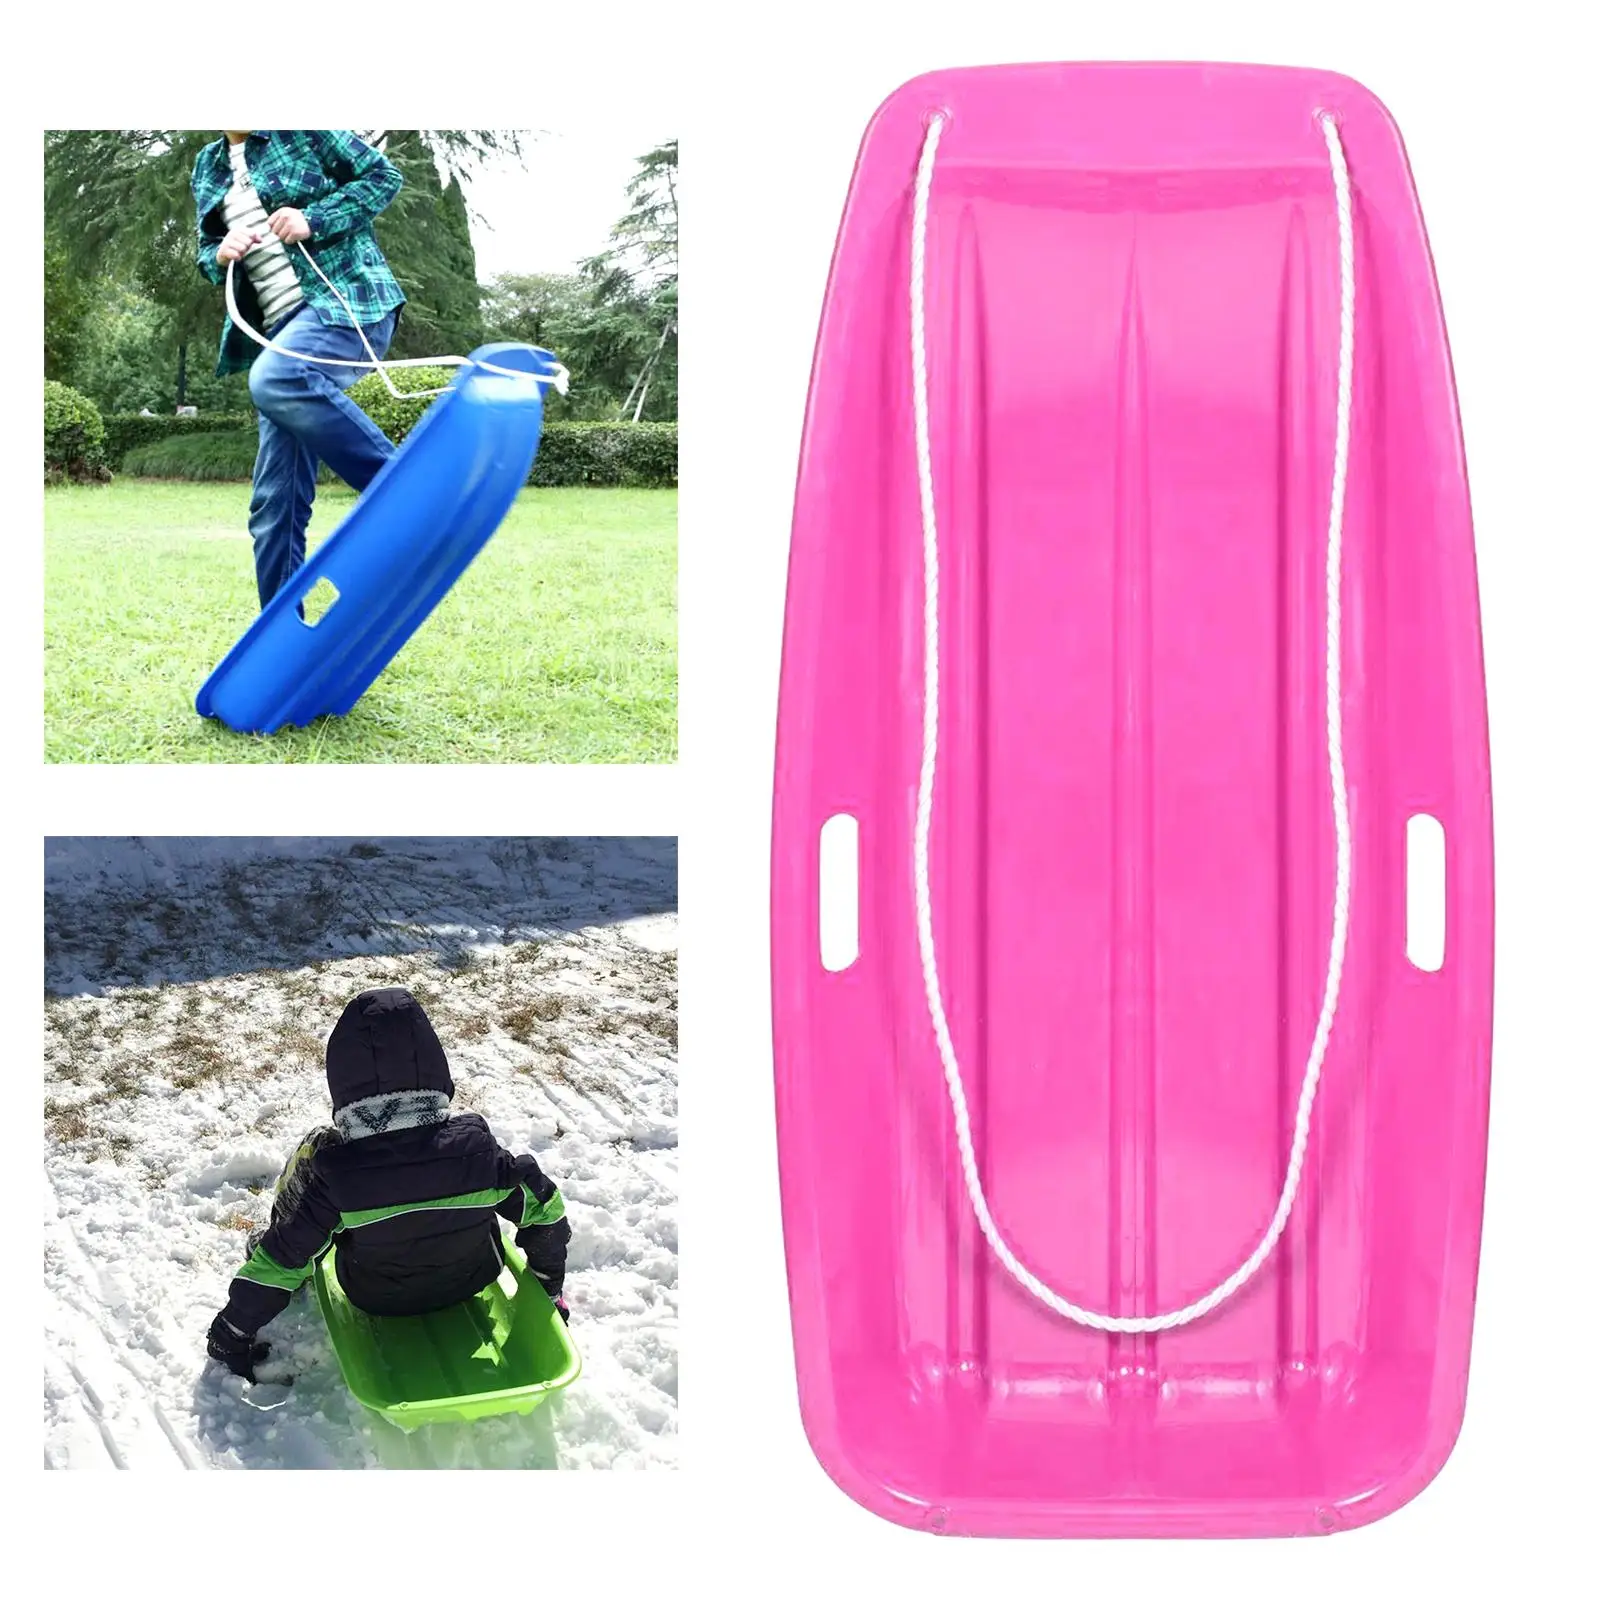 Multi0Function Outdoor Snow Sled Winter for Downhill Grass Skiing Adults